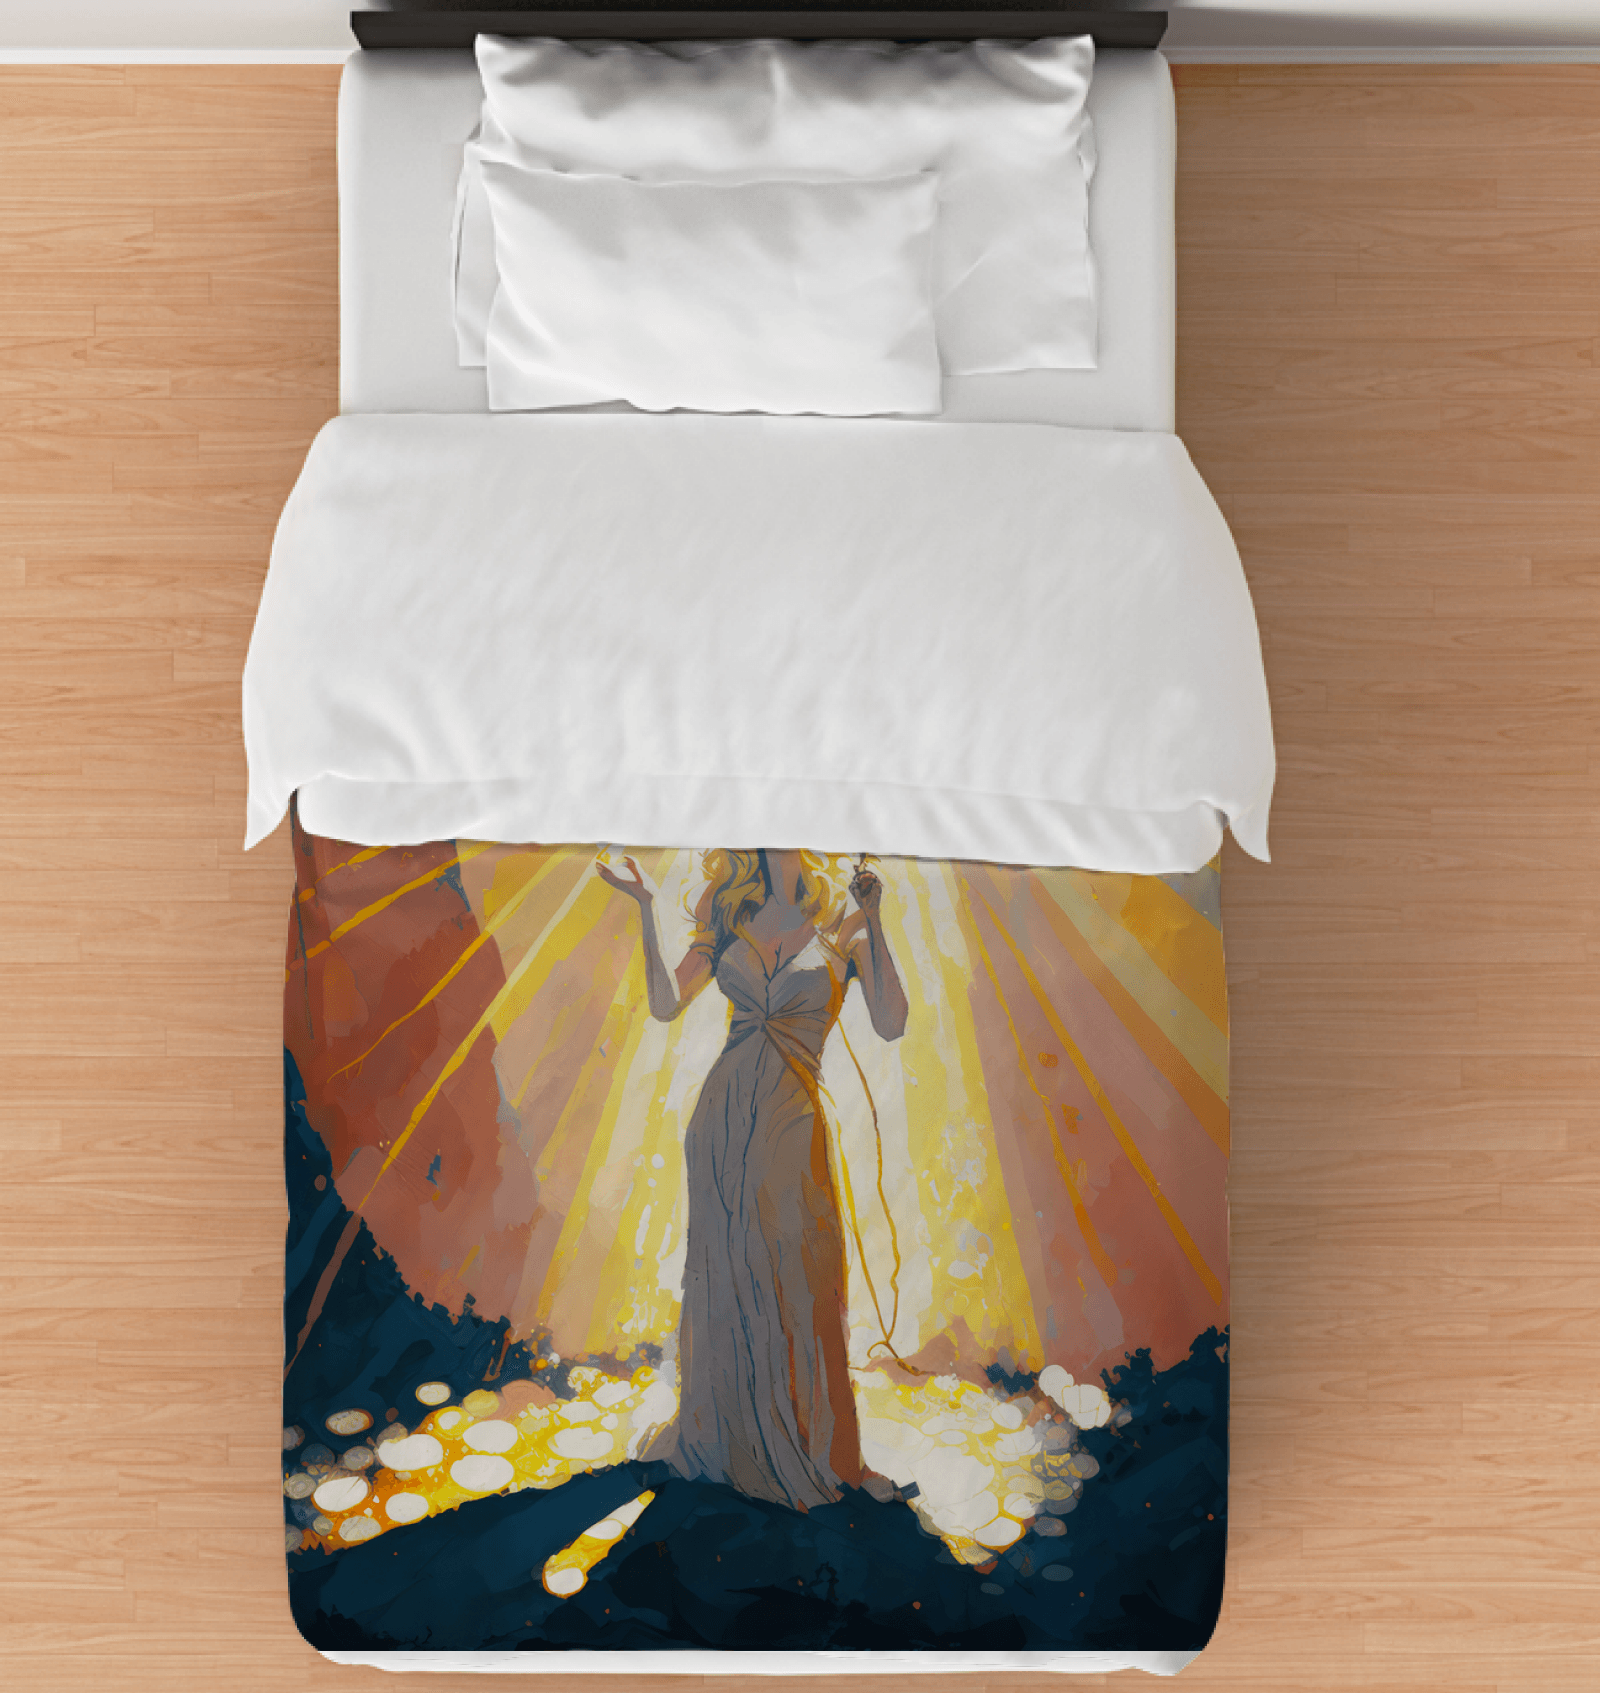 SurArt 71 Duvet Cover showcasing its contemporary design on a cozy bed setting.